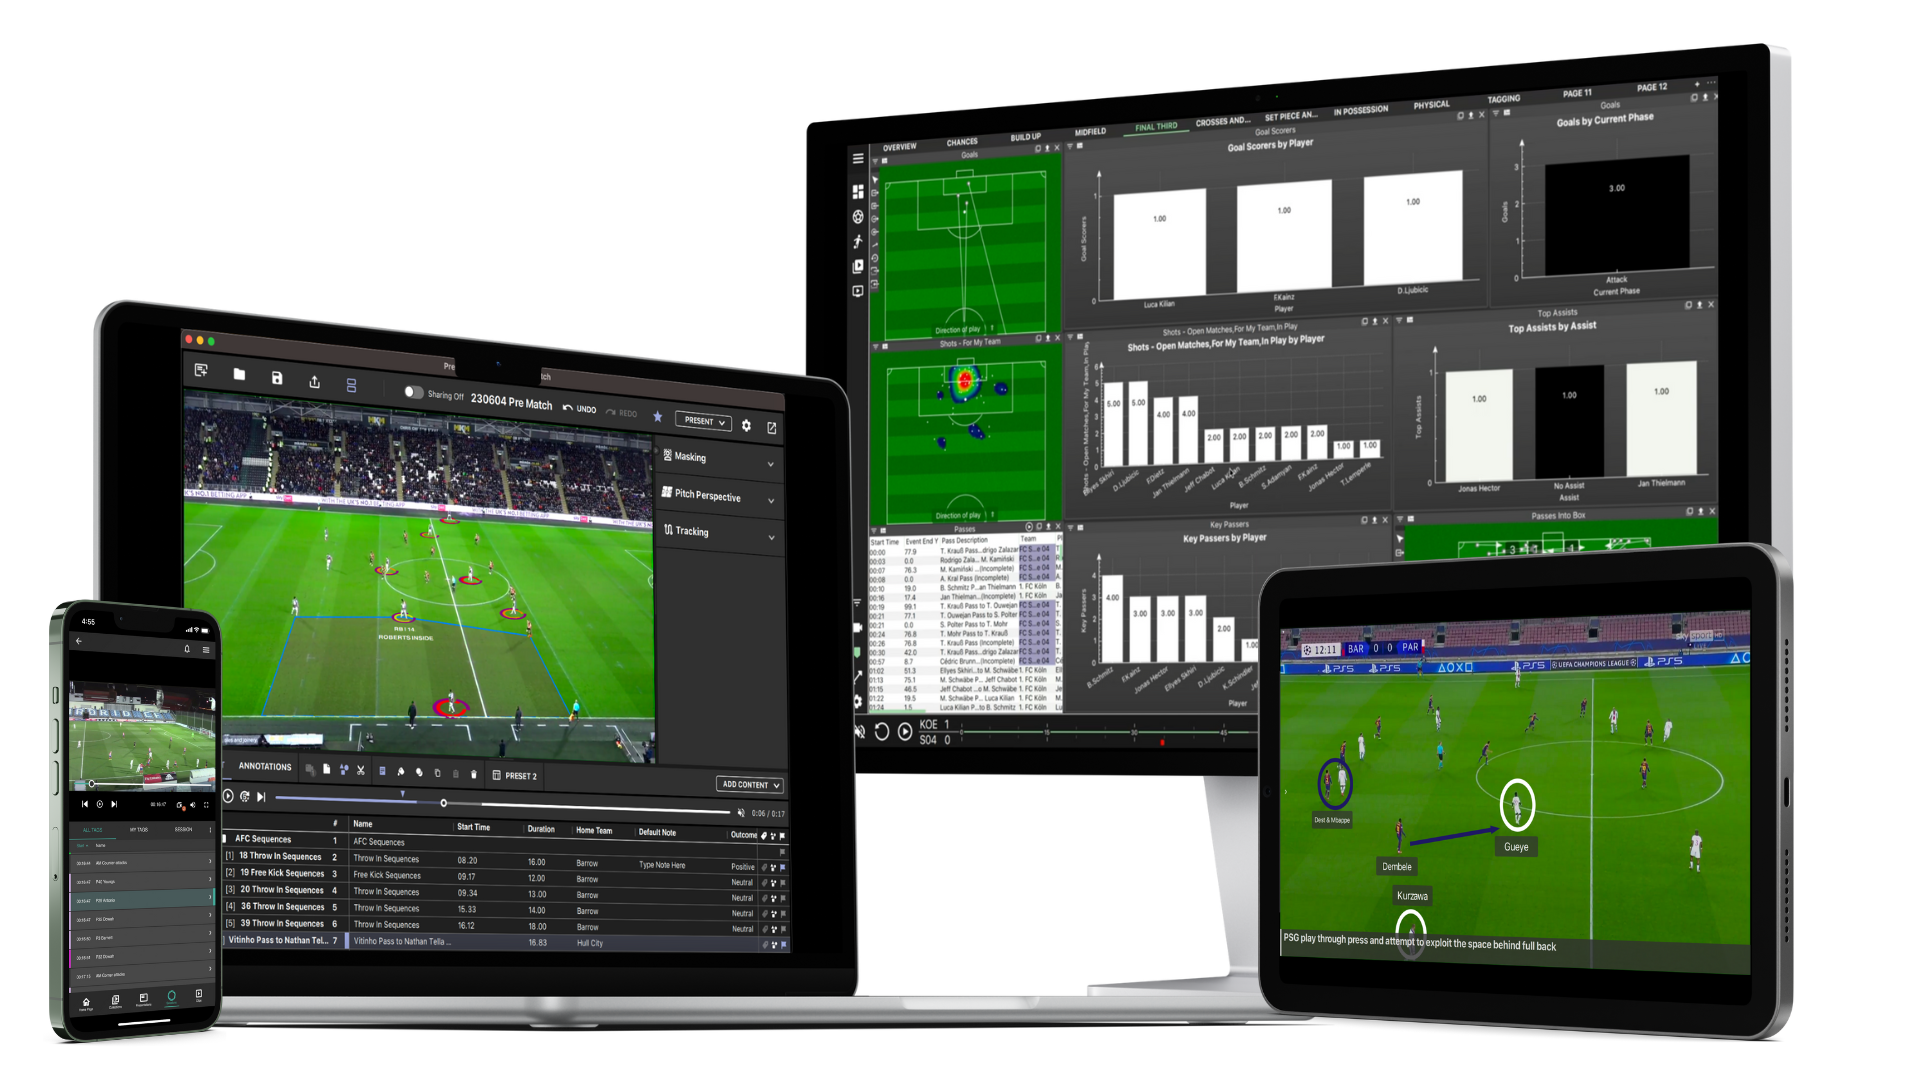 A multi-device display showing MatchTracker's various features for performance analysis. The image showcases the software on a smartphone, tablet, and computer monitor. The devices exhibit football match footage, data overlay of player positions and movements, and various analytical panels including charts and graphs detailing player statistics and match events.